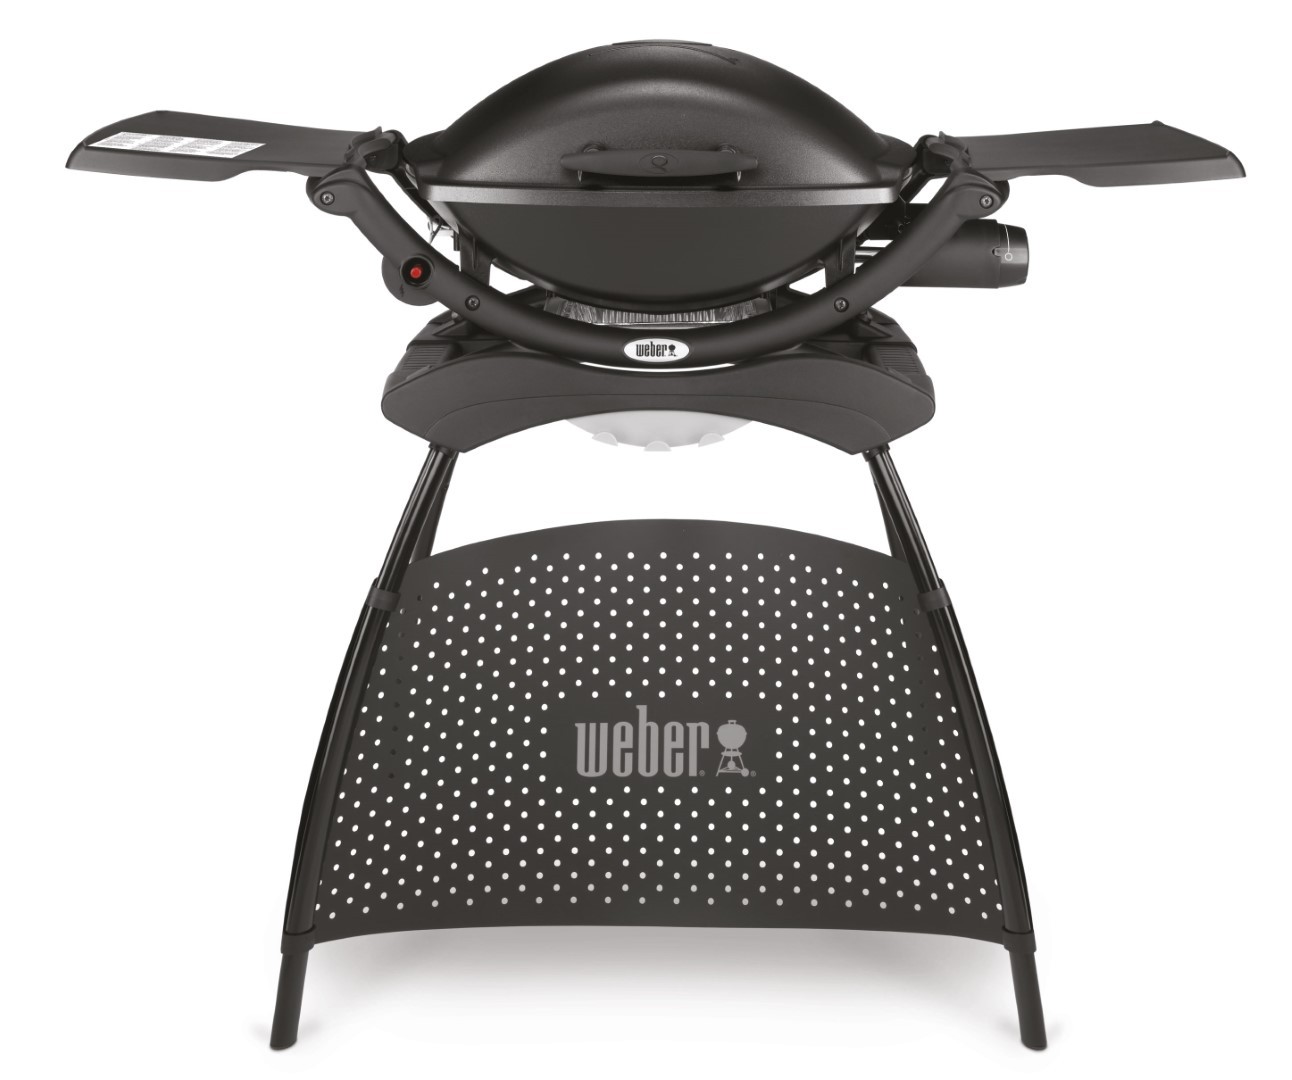 https://www.warentuin.nl/media/catalog/product/1/7/1770077924064371_weber_gas_barbecue_gas_barbecue_q_2000_stand_black_weber_cdf9.jpg